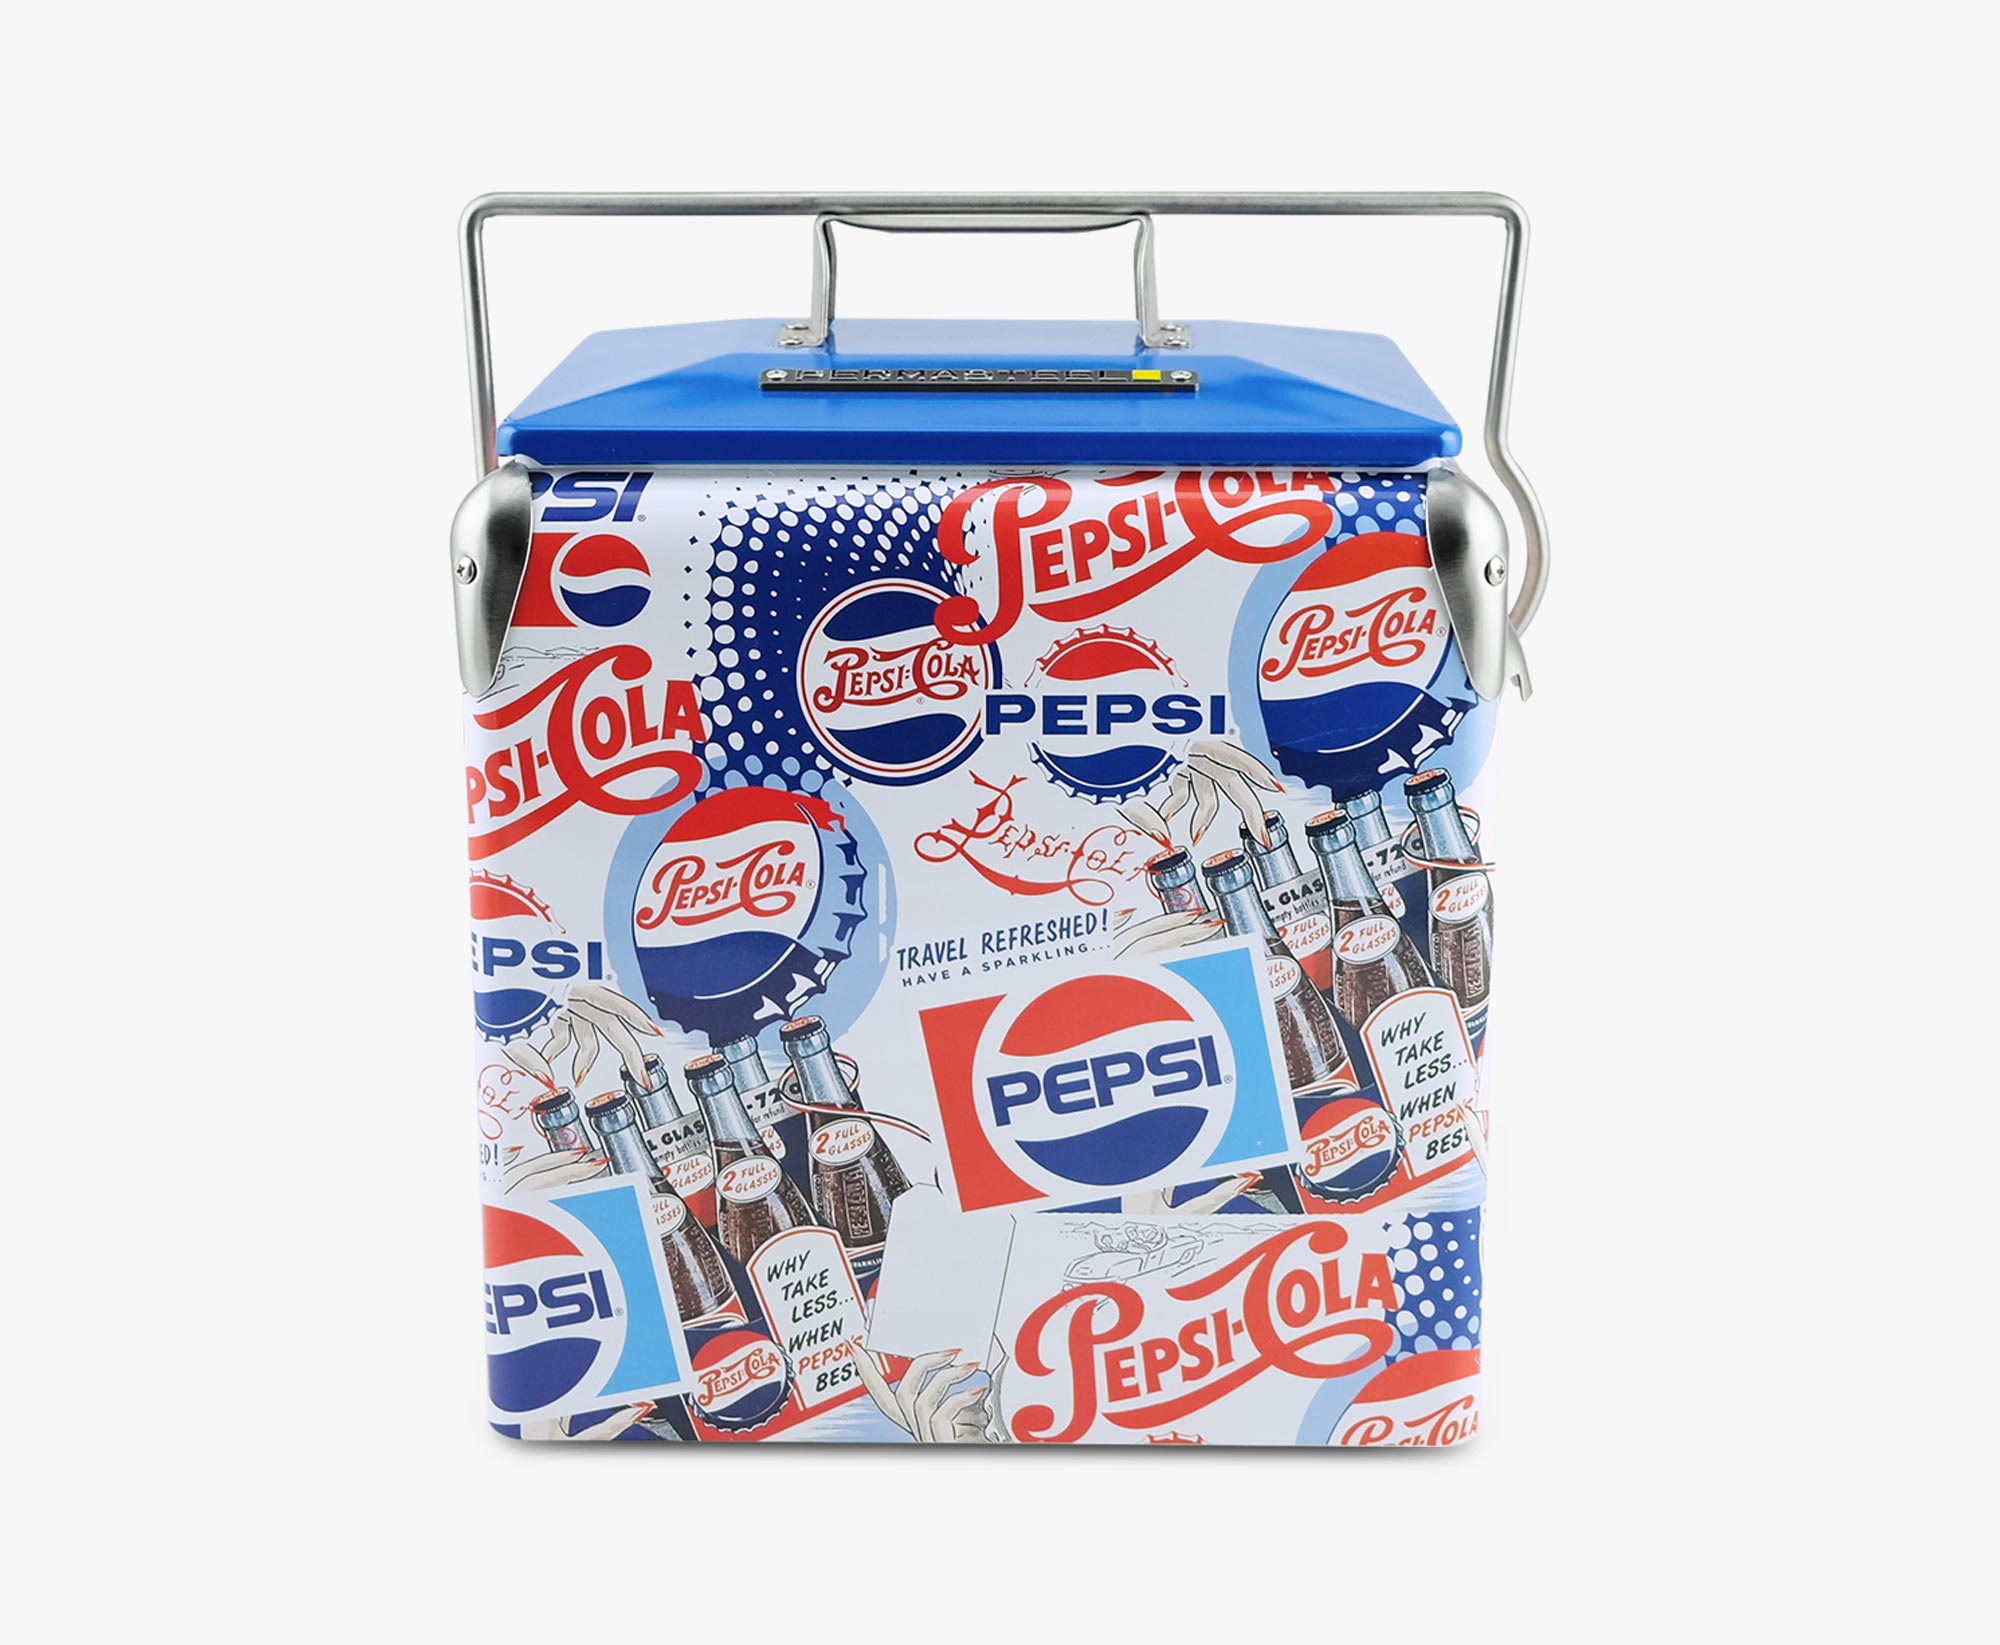 https://permasteel.life/wp-content/uploads/2023/03/permasteel-ps-205-14pe-wg-small-portable-picnic-cooler-pepsi-wrapped-graphic-product-image-2.jpg